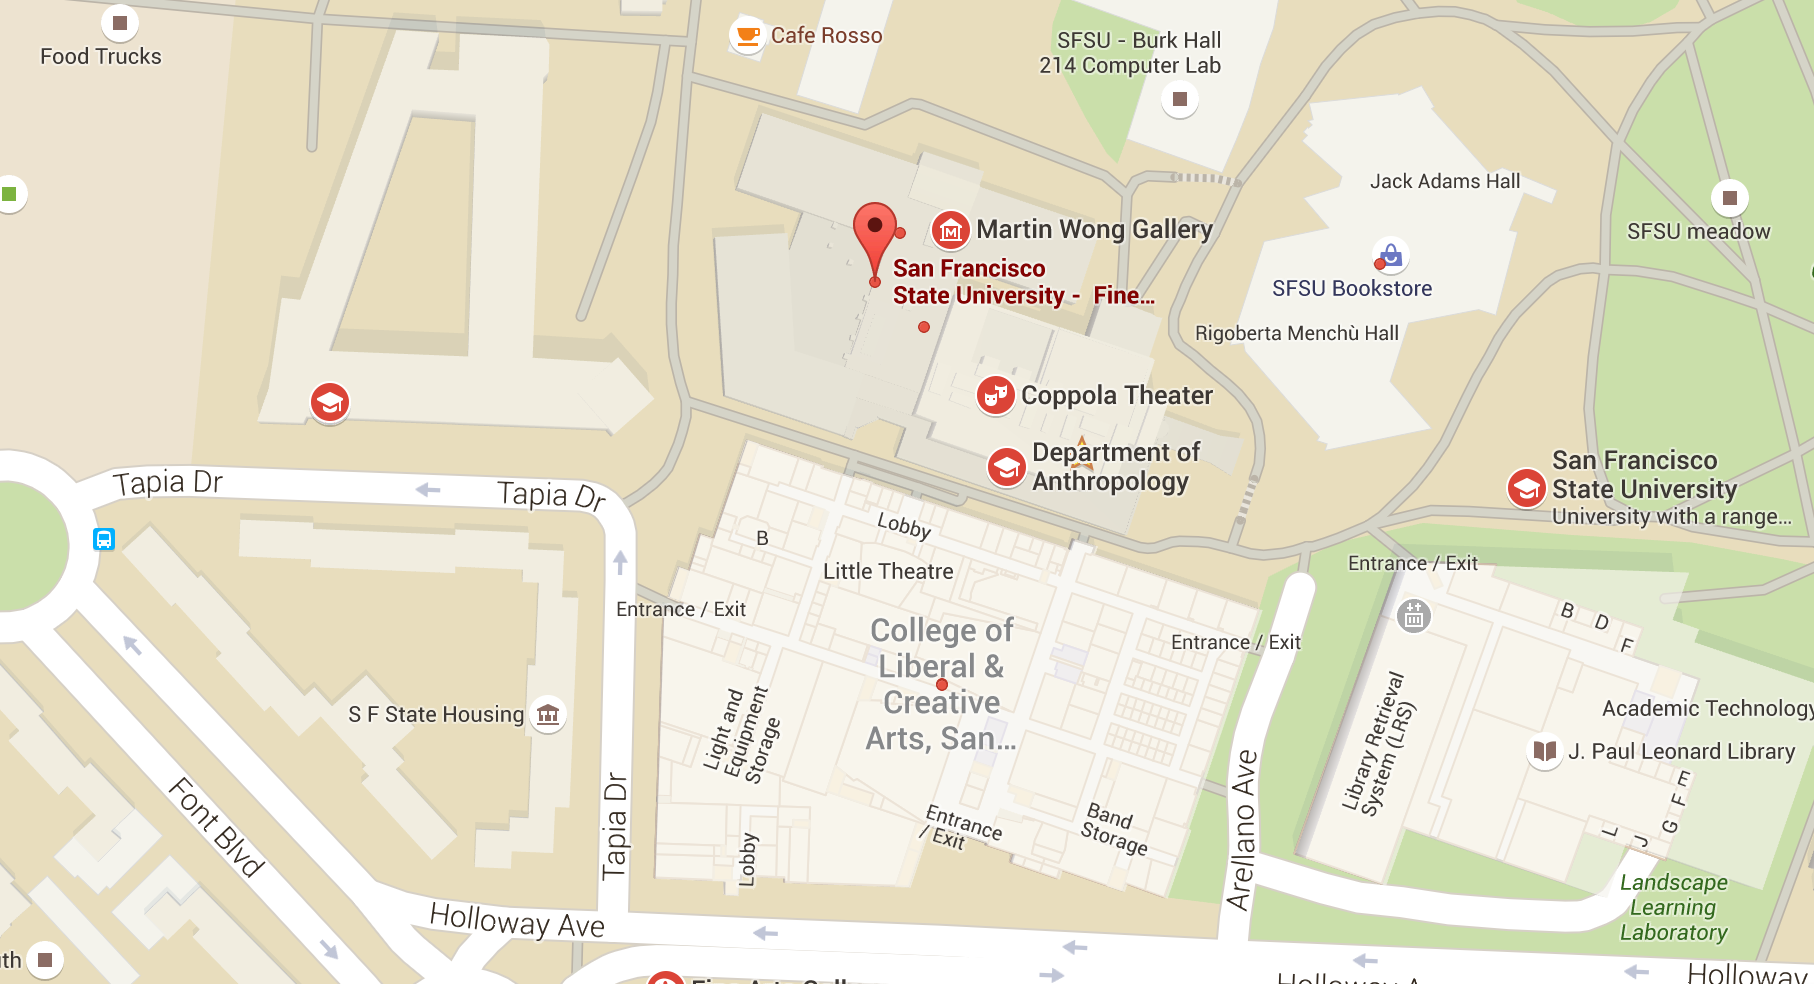 Map detailing location of LCA buildings at SF State